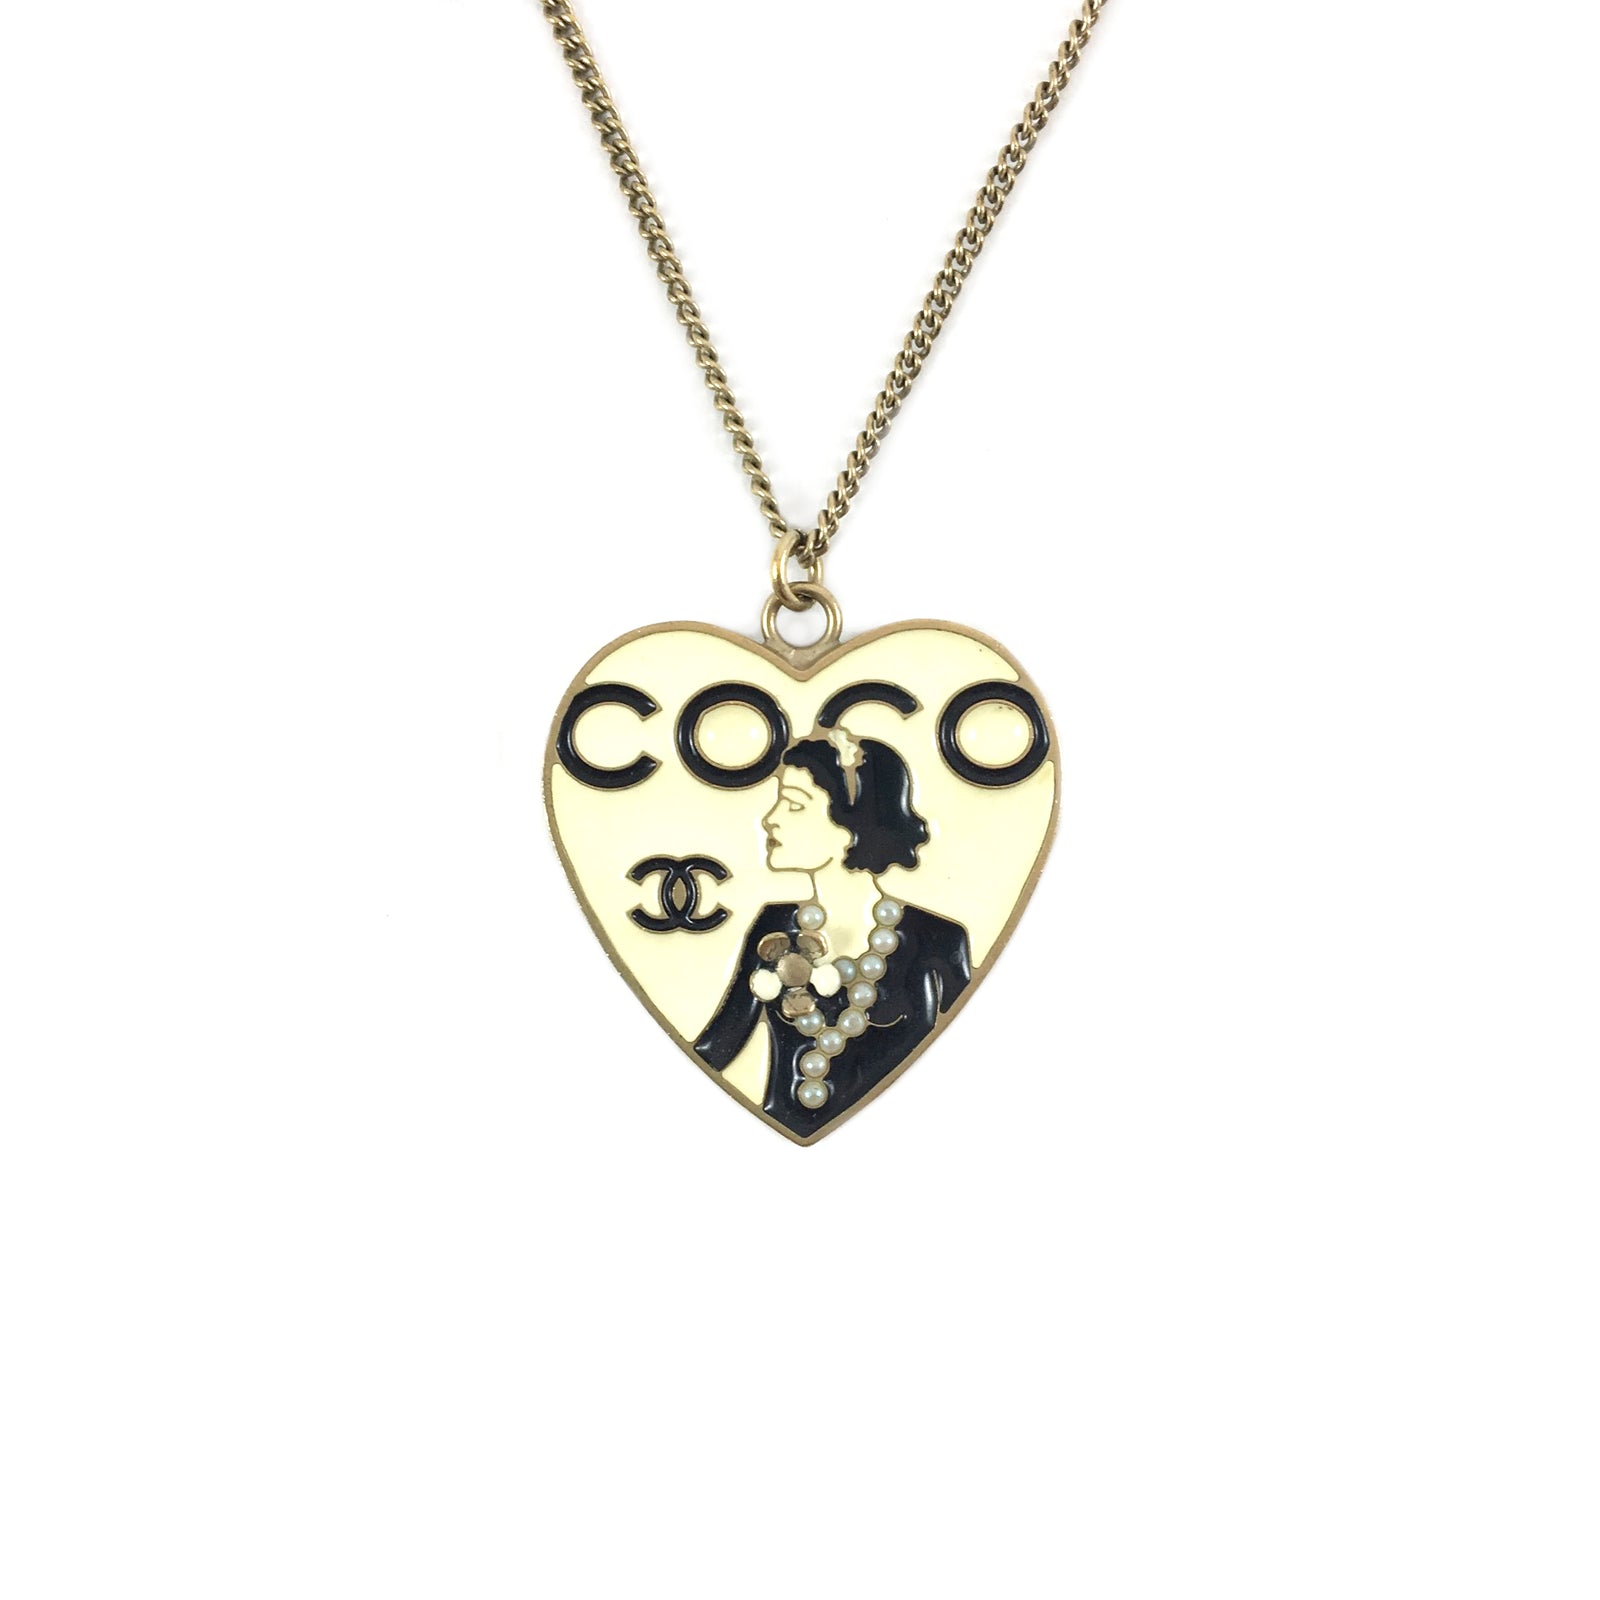 Coco Chanel Heart Necklace